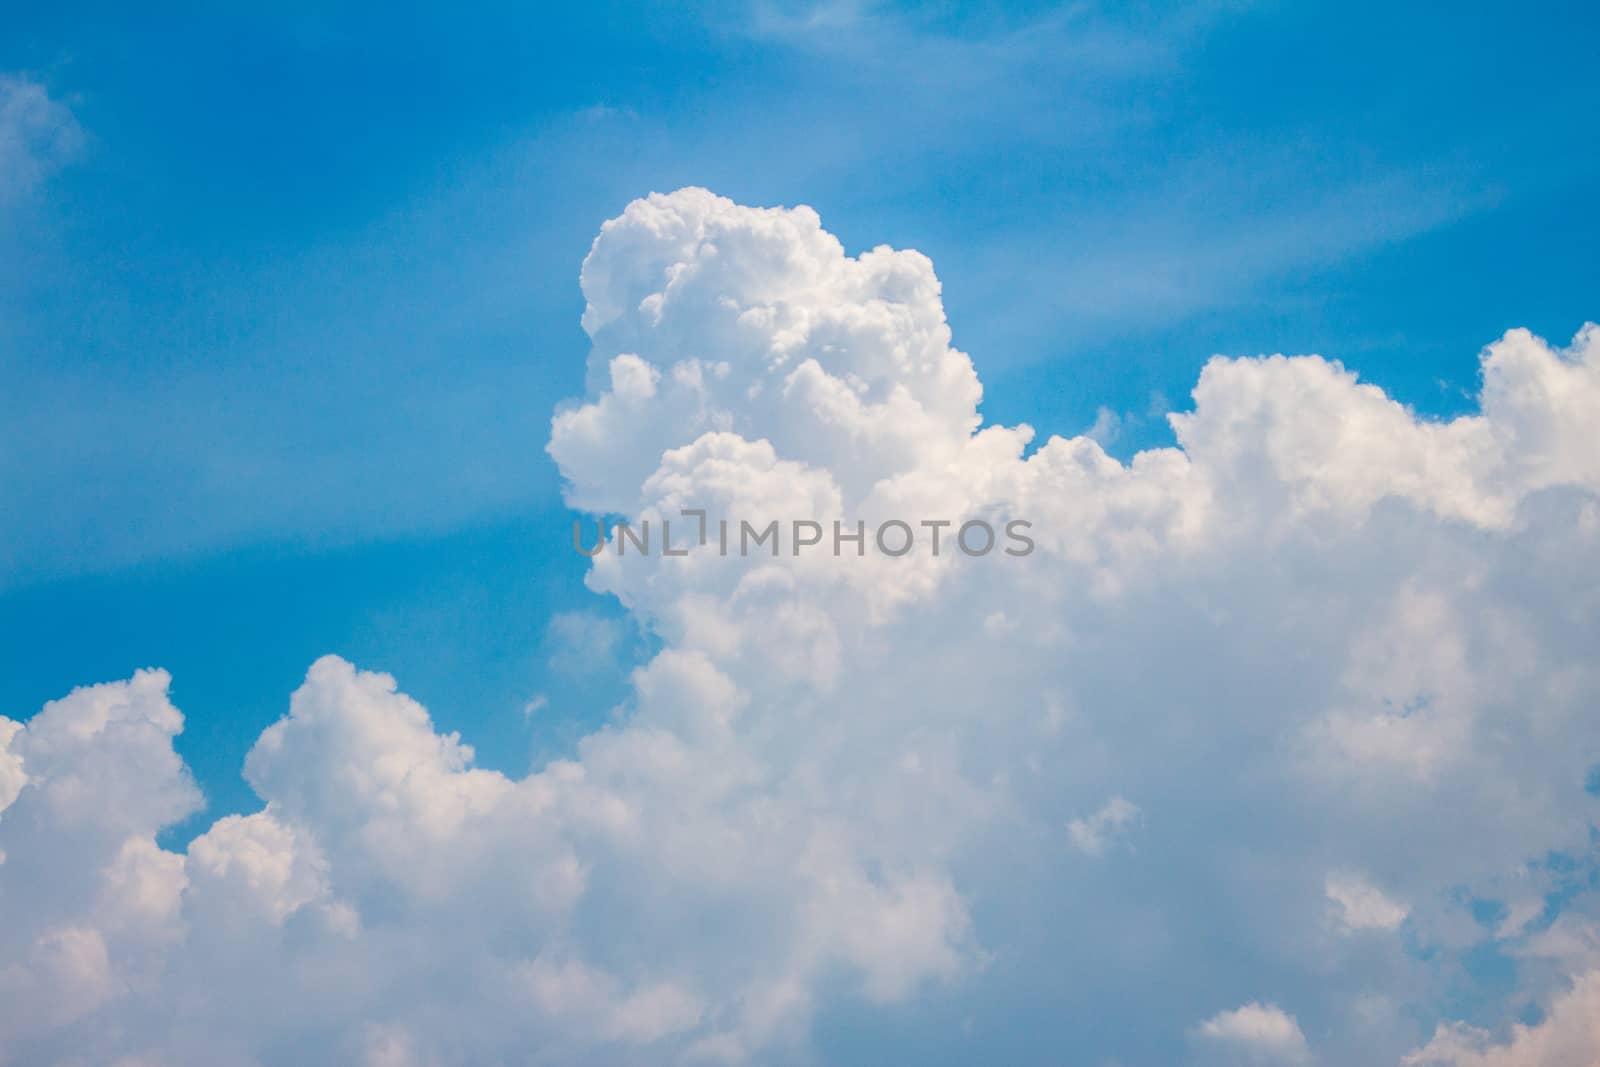 The Blue sky with white cloud be overcast